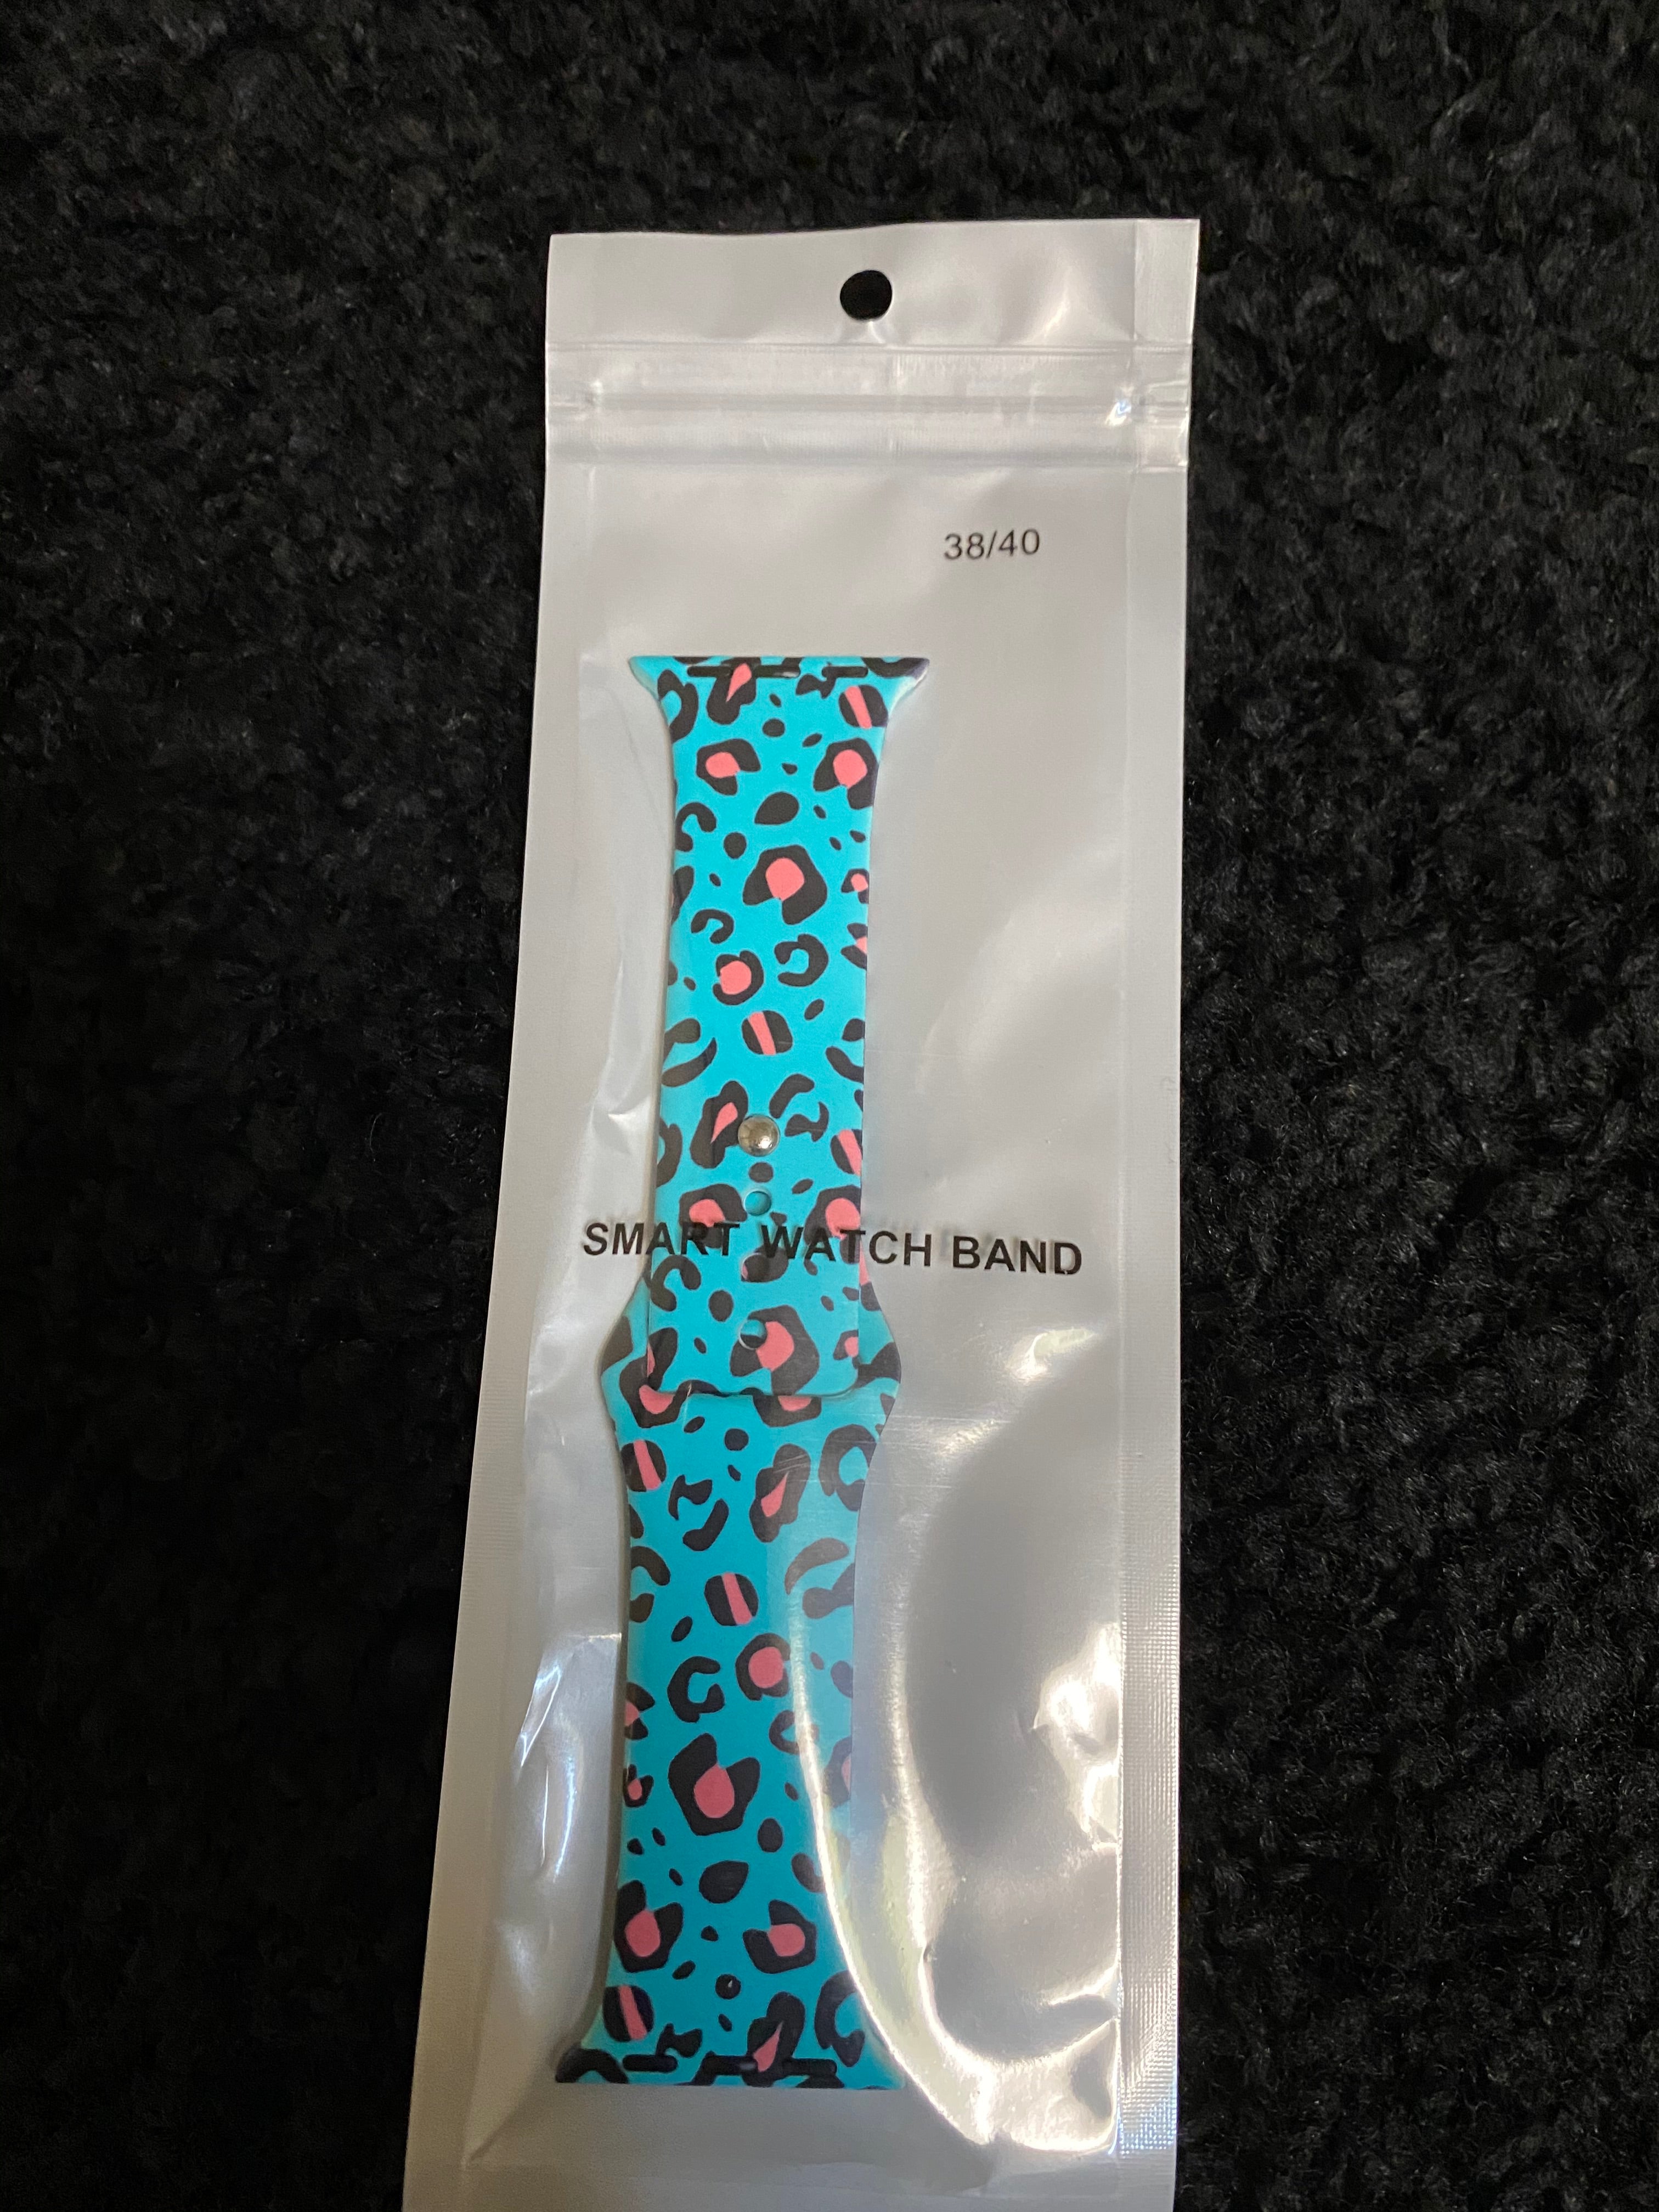 Patterned Apple Watch Bands (38/40mm)